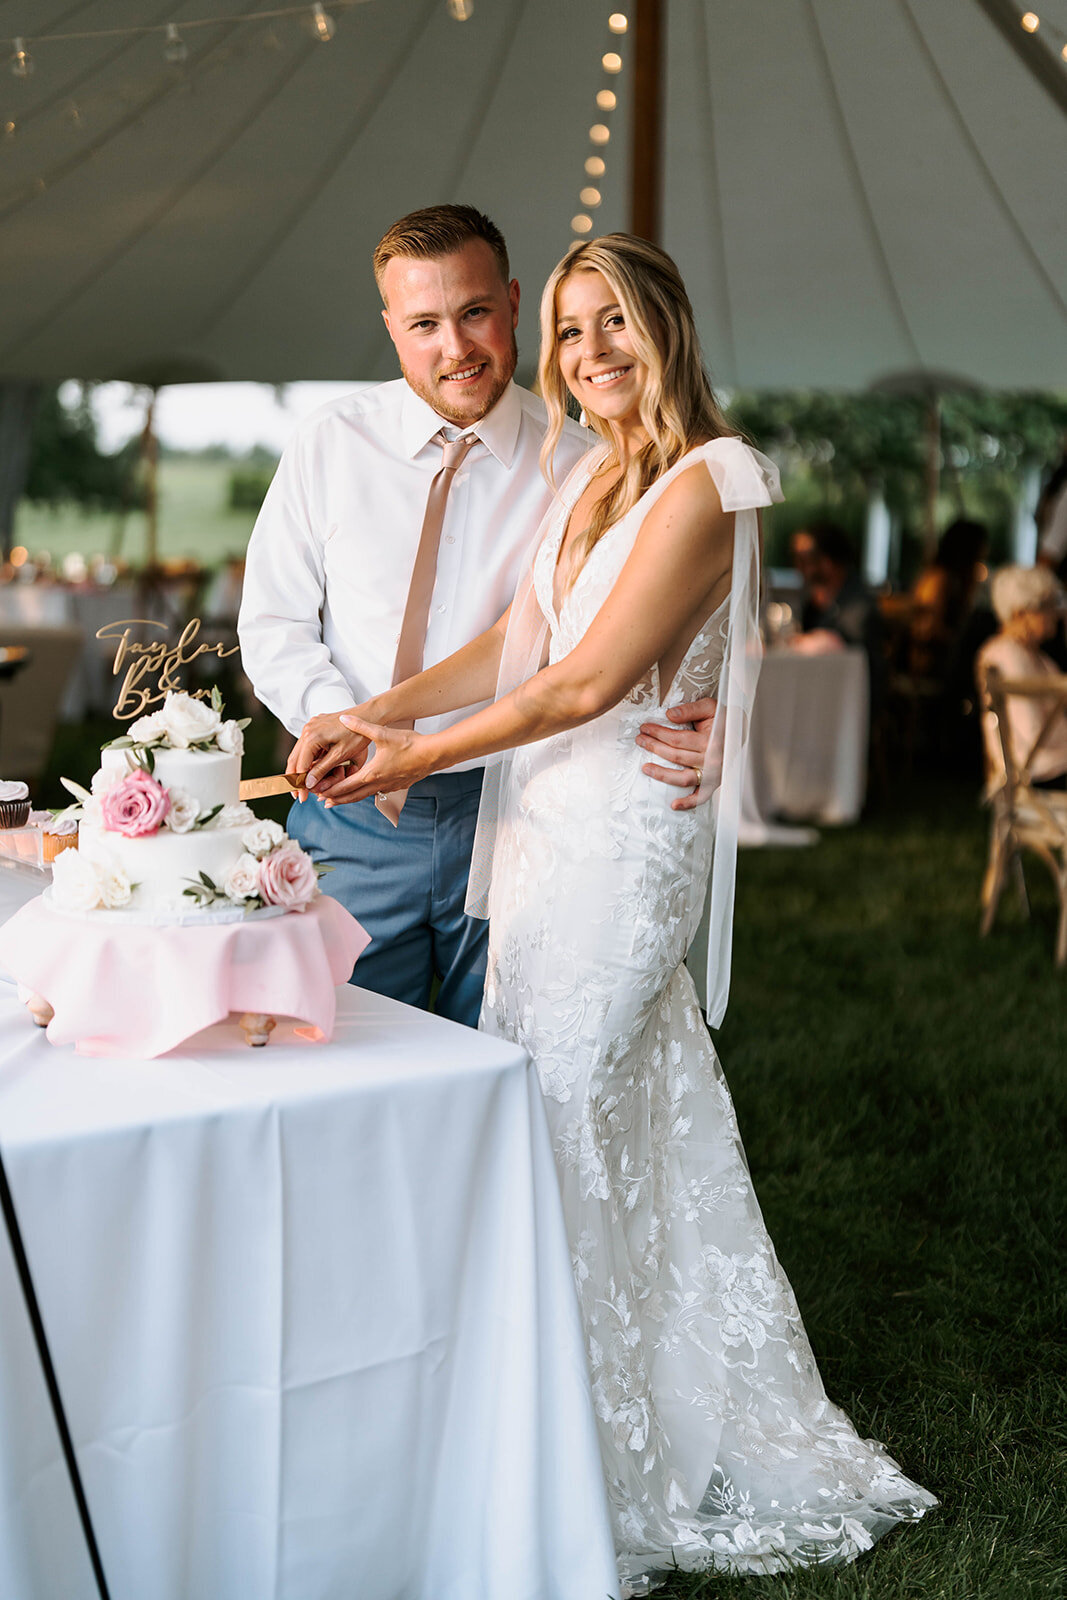 quiet cake cutting in tented wedding reception with blush and white decor